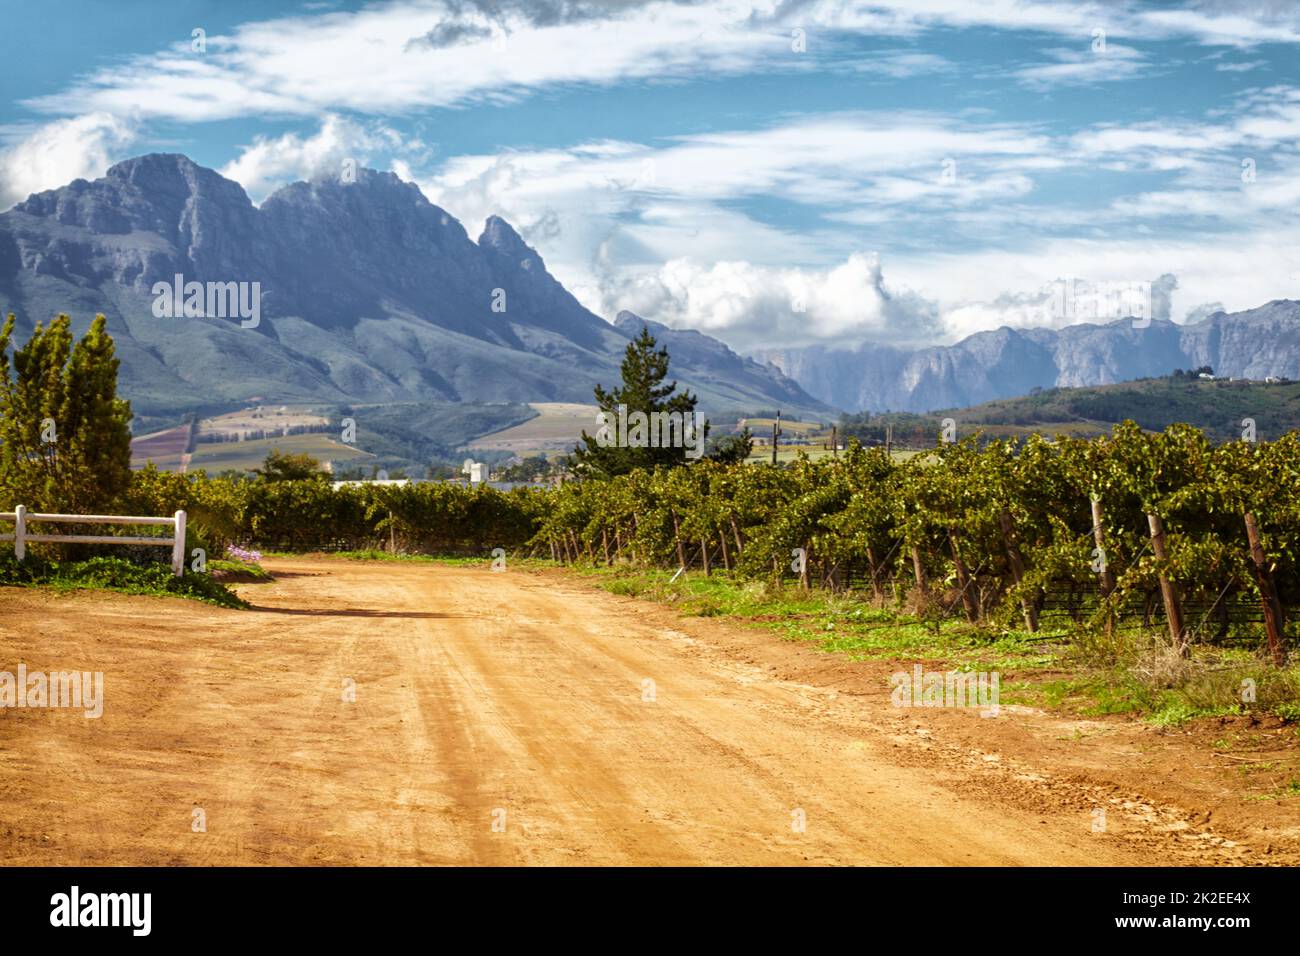 Rural magnificence. Panoramic shot of lush vineyards and picturesque mountains in the distance. Stock Photo